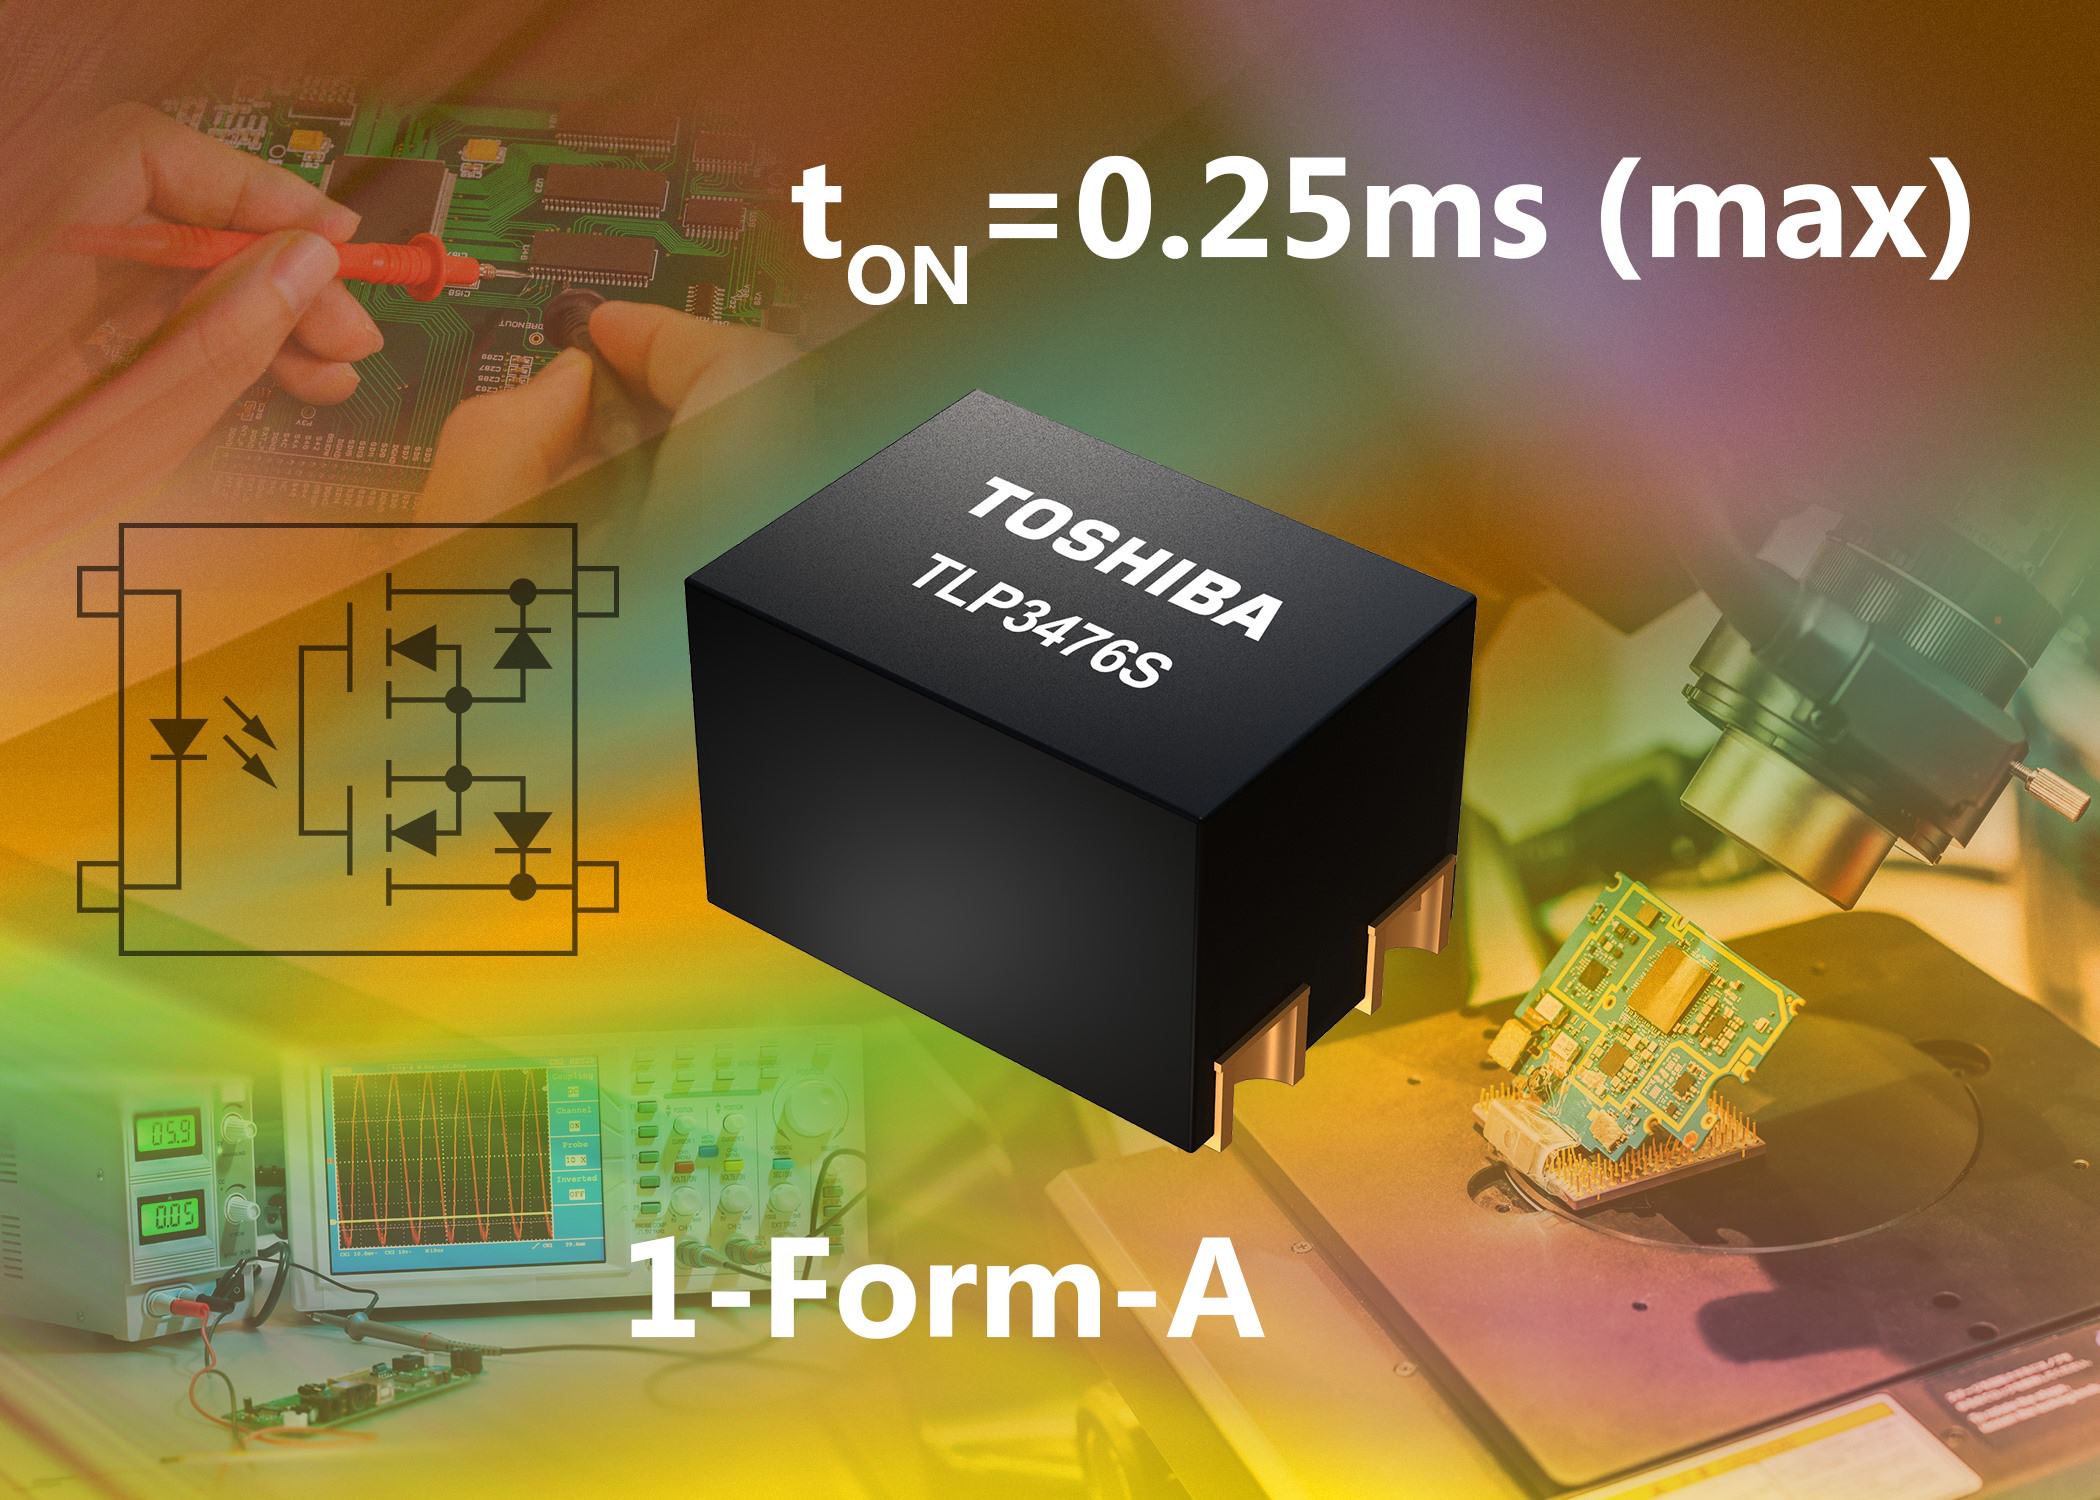 Toshiba's Compact new Photorelays Feature Maximum Turn on Time of Only 0.25ms